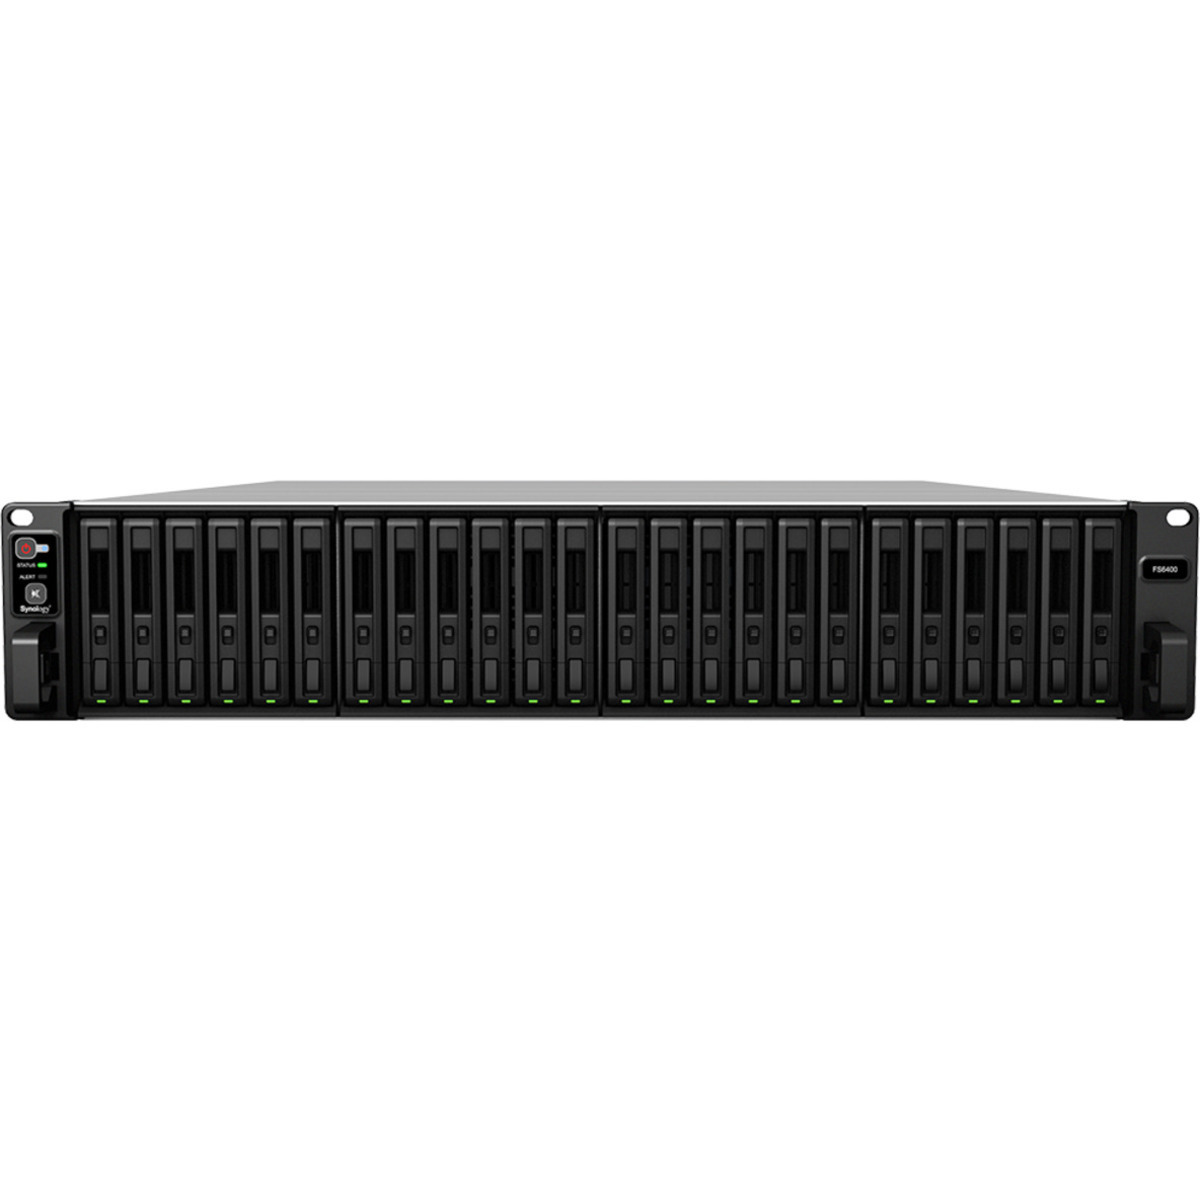 Synology FlashStation FS6400 42.2tb 24-Bay RackMount Large Business / Enterprise NAS - Network Attached Storage Device 22x1.9tb Synology SAT5210 Series SAT5210-1920G 2.5 530/500MB/s SATA 6Gb/s SSD ENTERPRISE Class Drives Installed - Burn-In Tested FlashStation FS6400